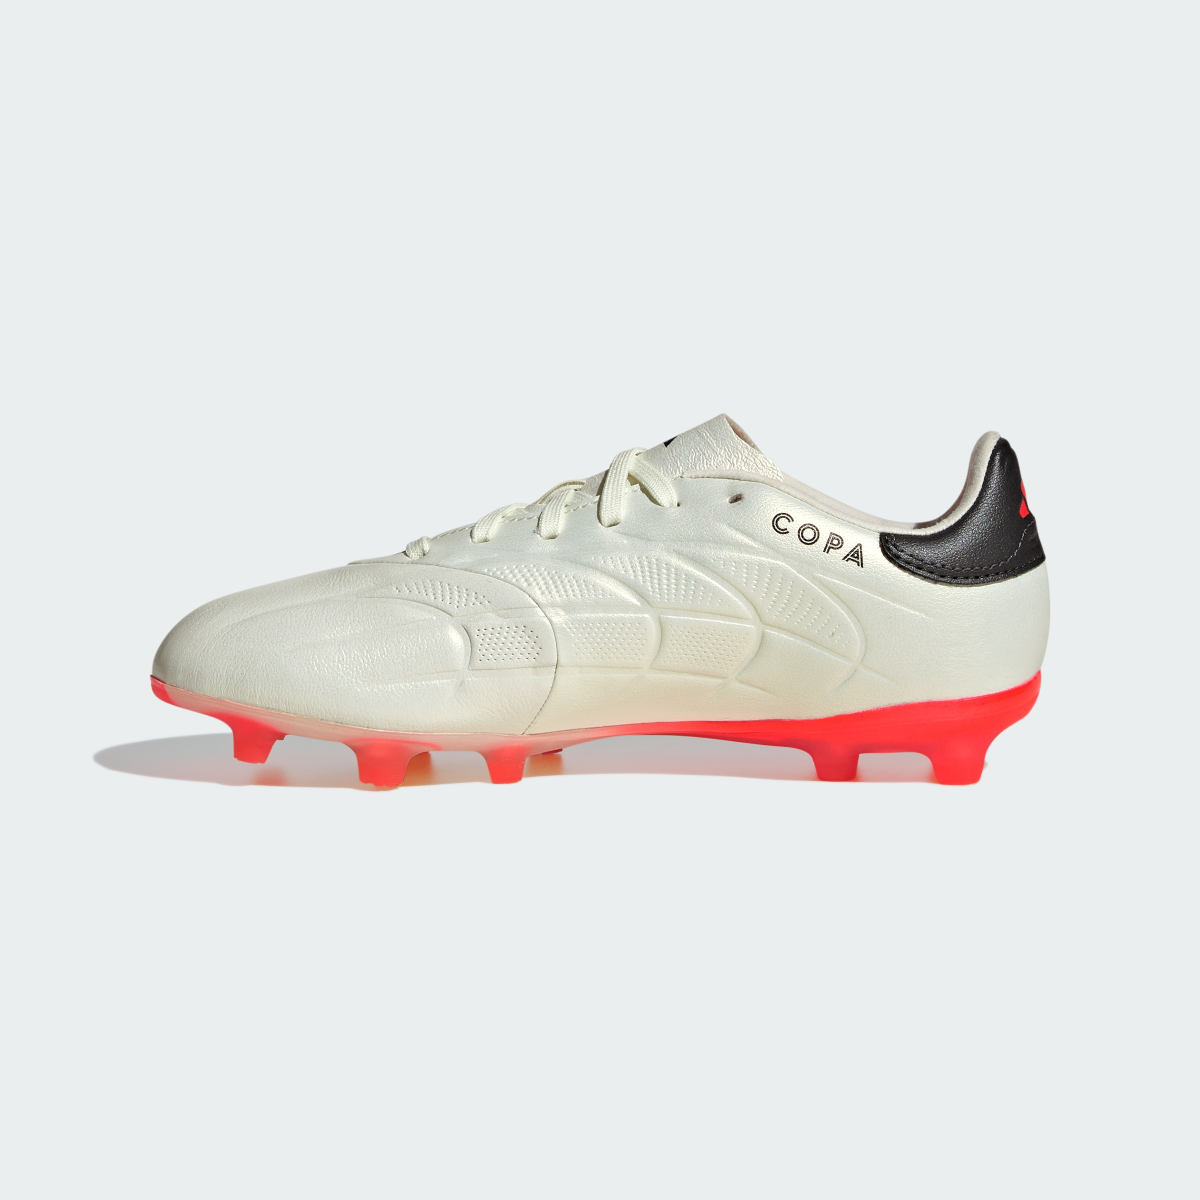 Adidas Copa Pure II Elite Firm Ground Boots. 7